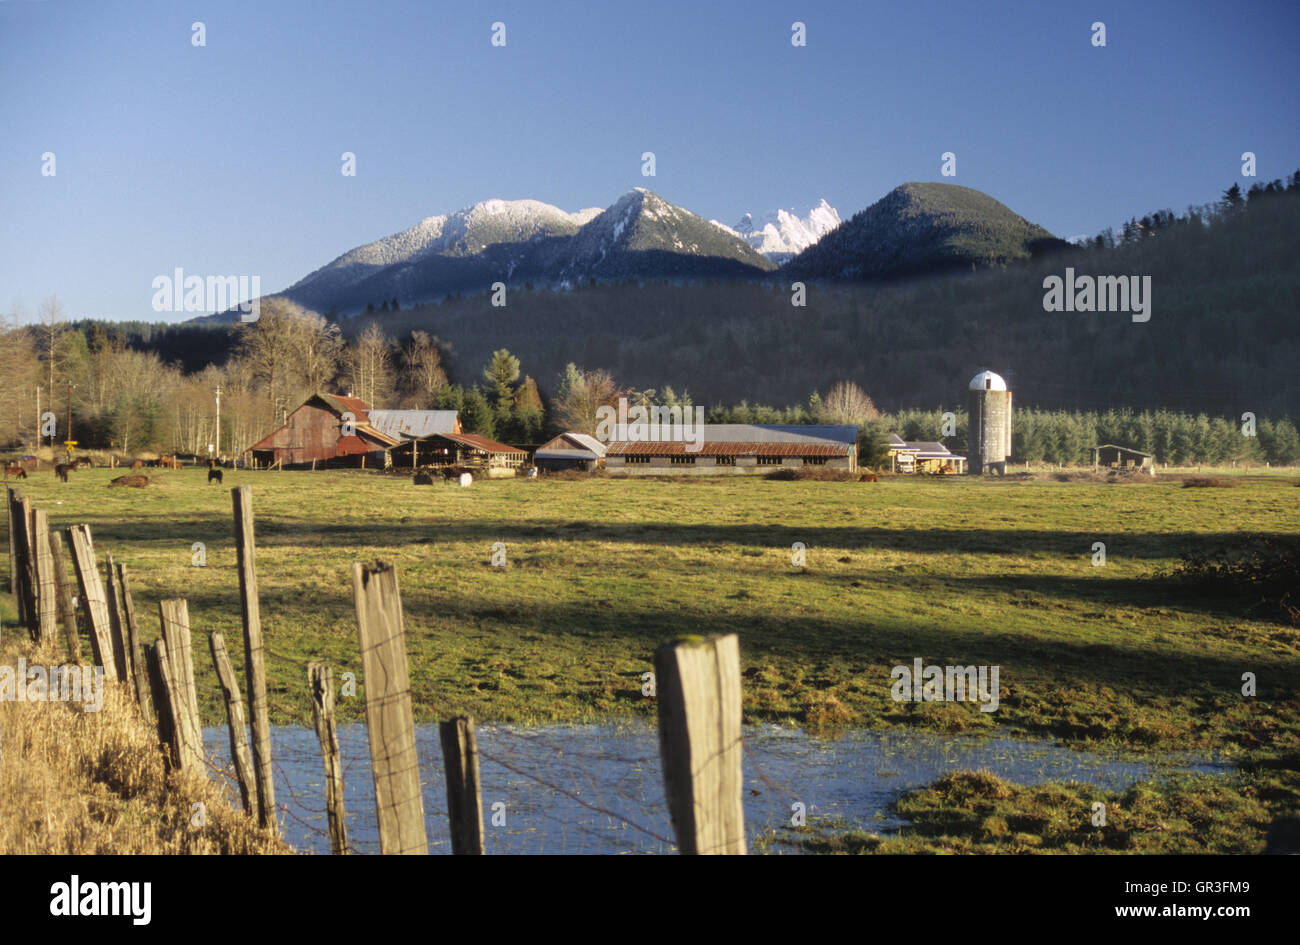 A large farm in Washington State's Cascade Mountains in the Pacific Northwest. Stock Photo